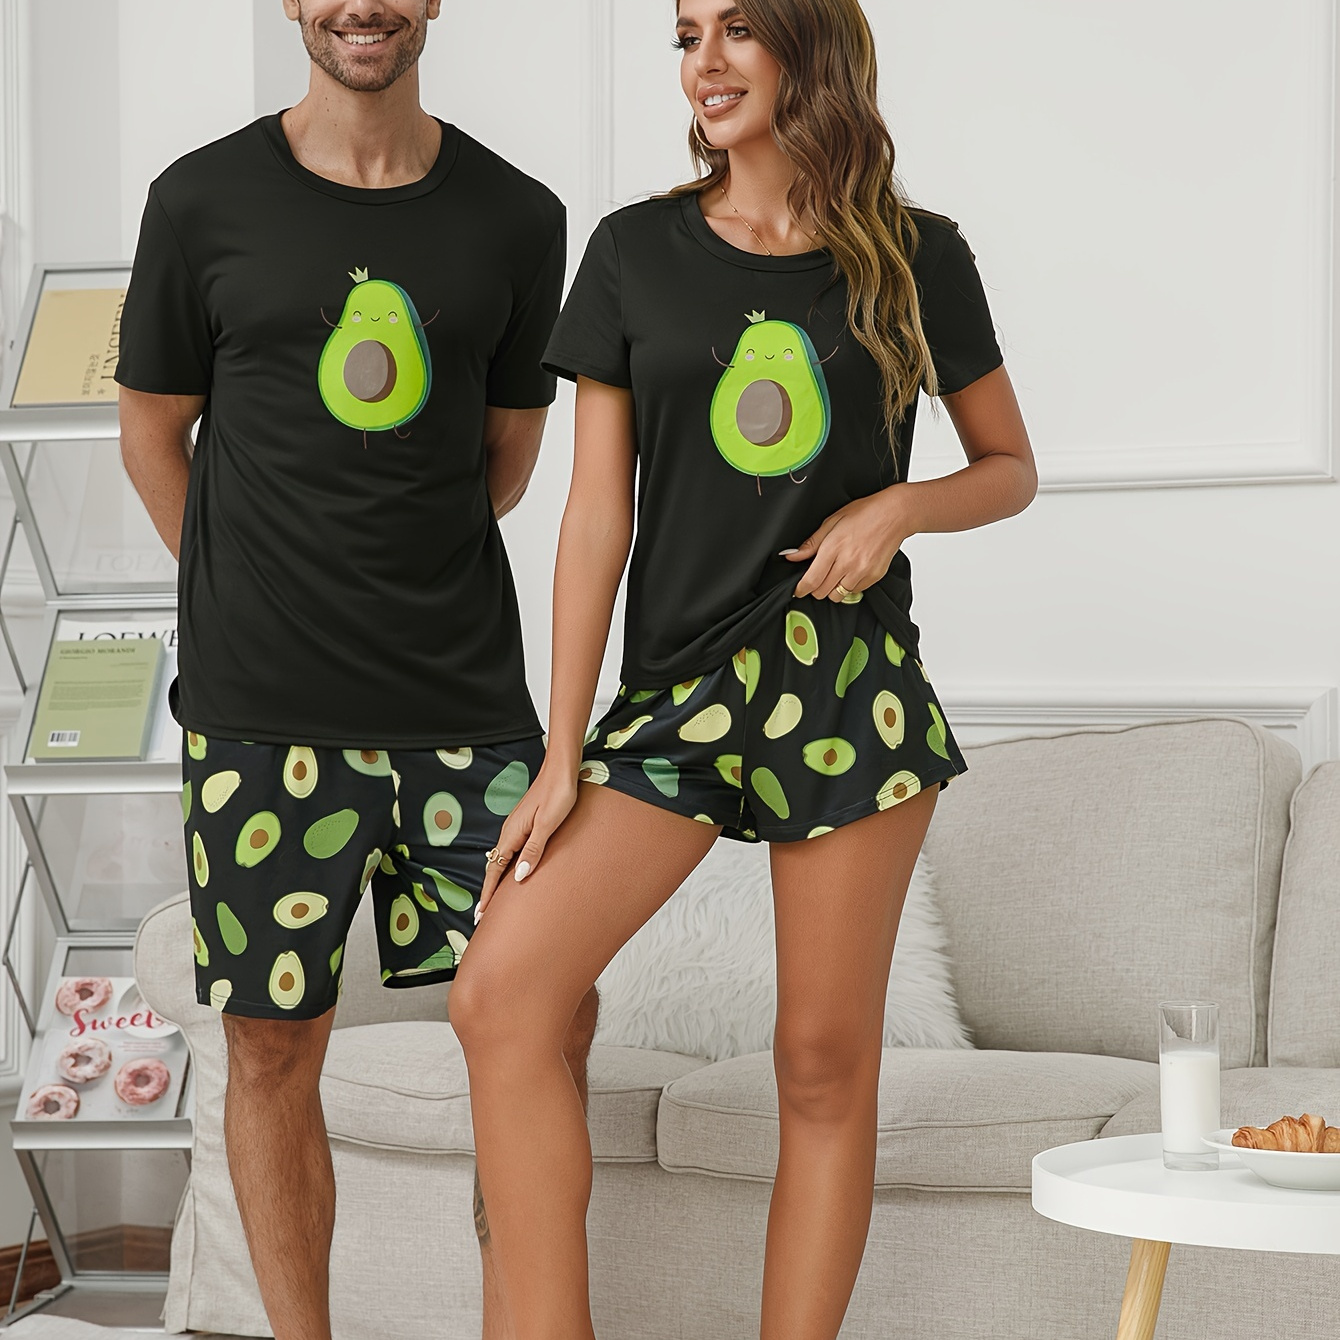 

Men's Couple's 2 Pcs Leisure Pajama Suit - Cute Avocado Print Round Neck Short Sleeve & Shorts For Daily Wearing